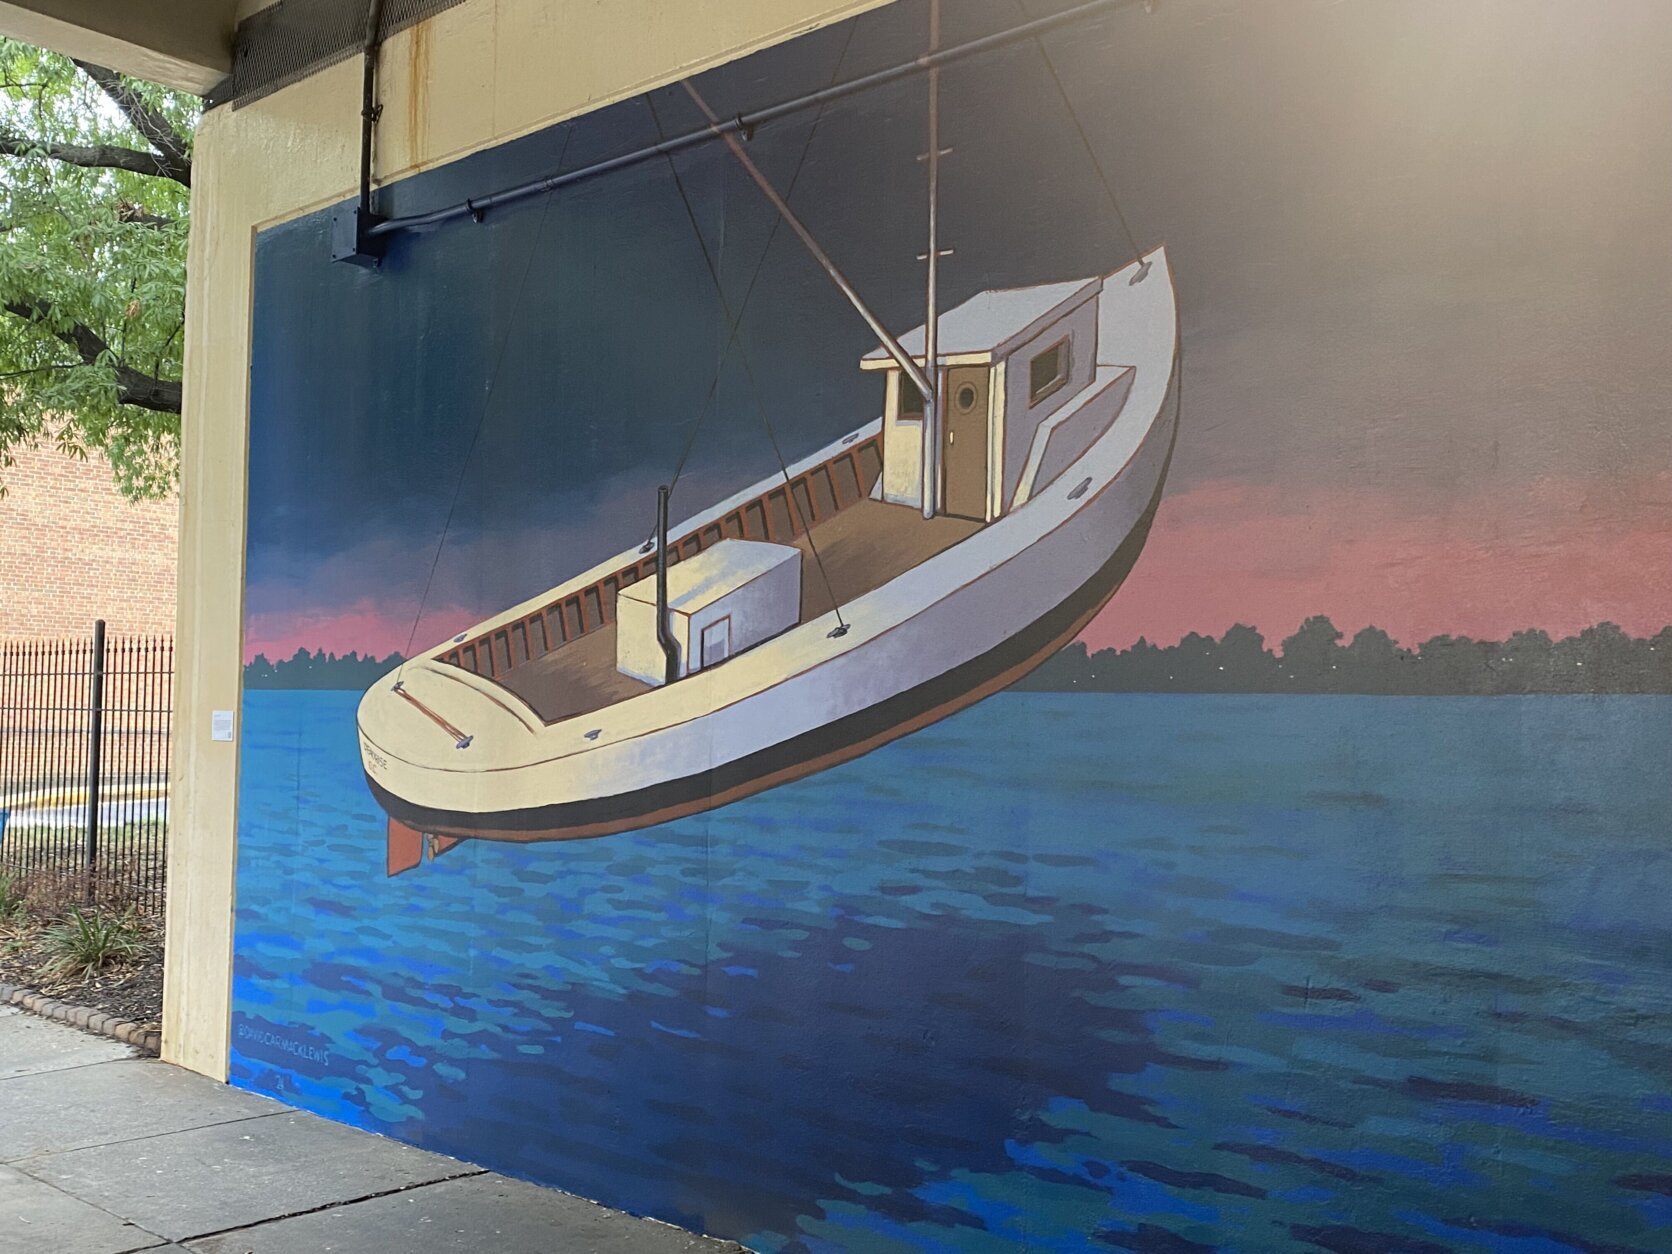 A mural of a boat